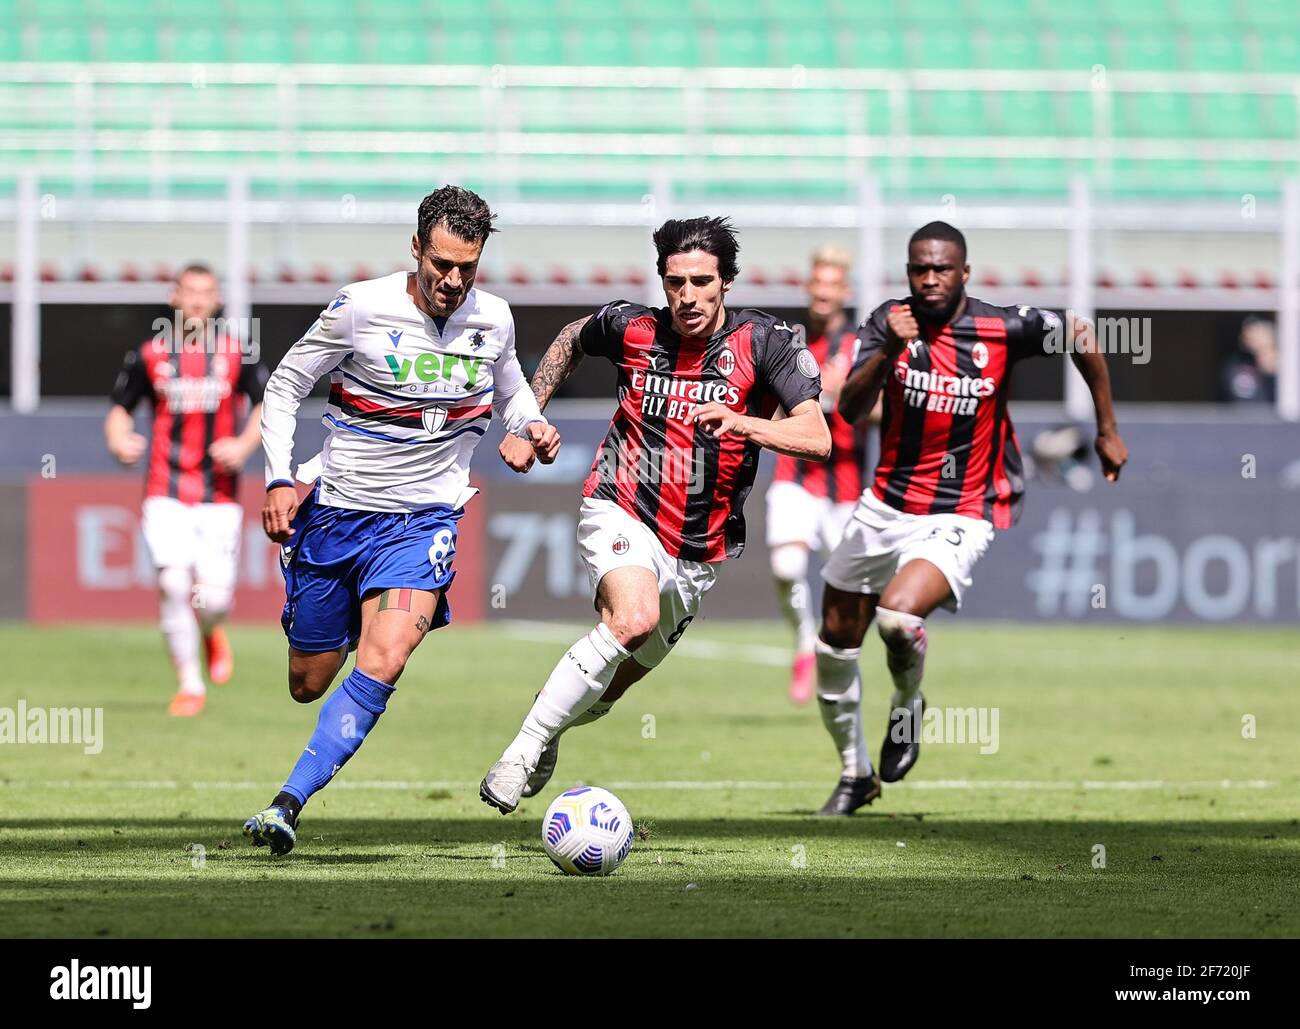 Milan, Italy. 03rd Apr, 2021. Antonio Candreva of UC Sampdoria and Sandro Tonali of AC Milan are seen in action during the Serie A 2020/21 football match between AC Milan and UC Sampdoria at the San Siro Stadium.(Final score; AC Milan 1:1 UC Sampdoria) Credit: SOPA Images Limited/Alamy Live News Stock Photo